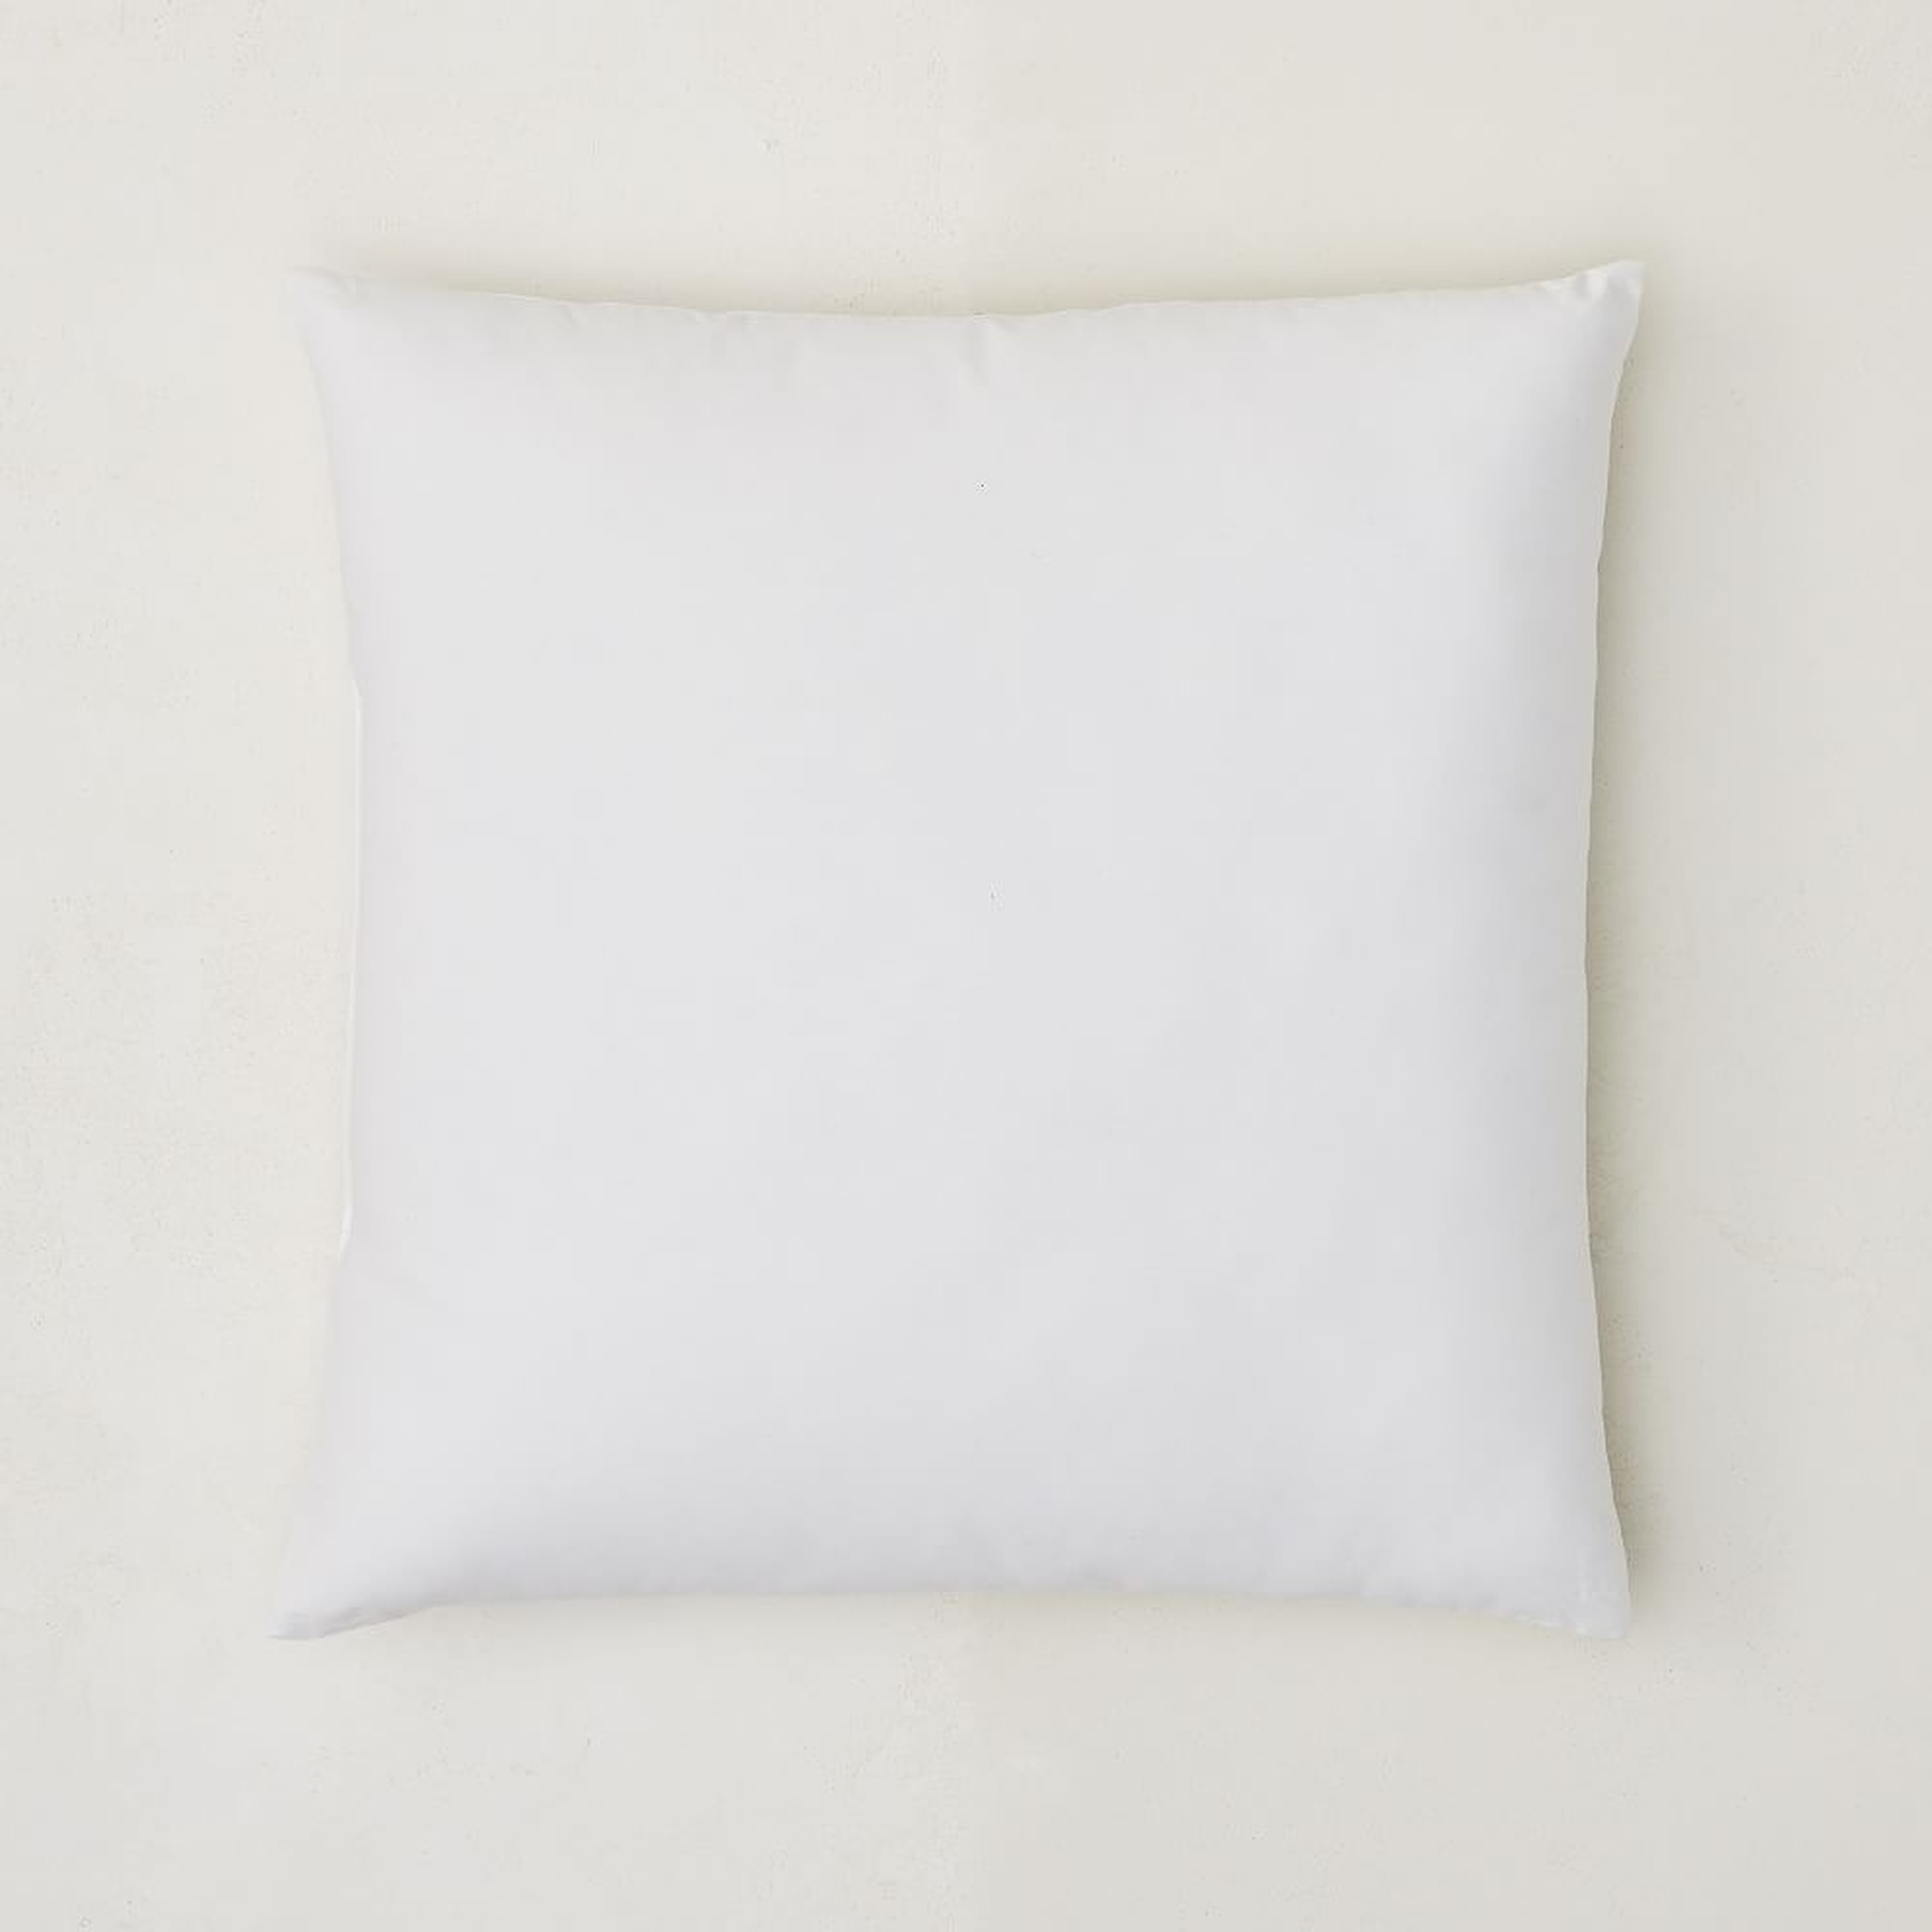 Feather Down Insert, White, 18"x18" - West Elm